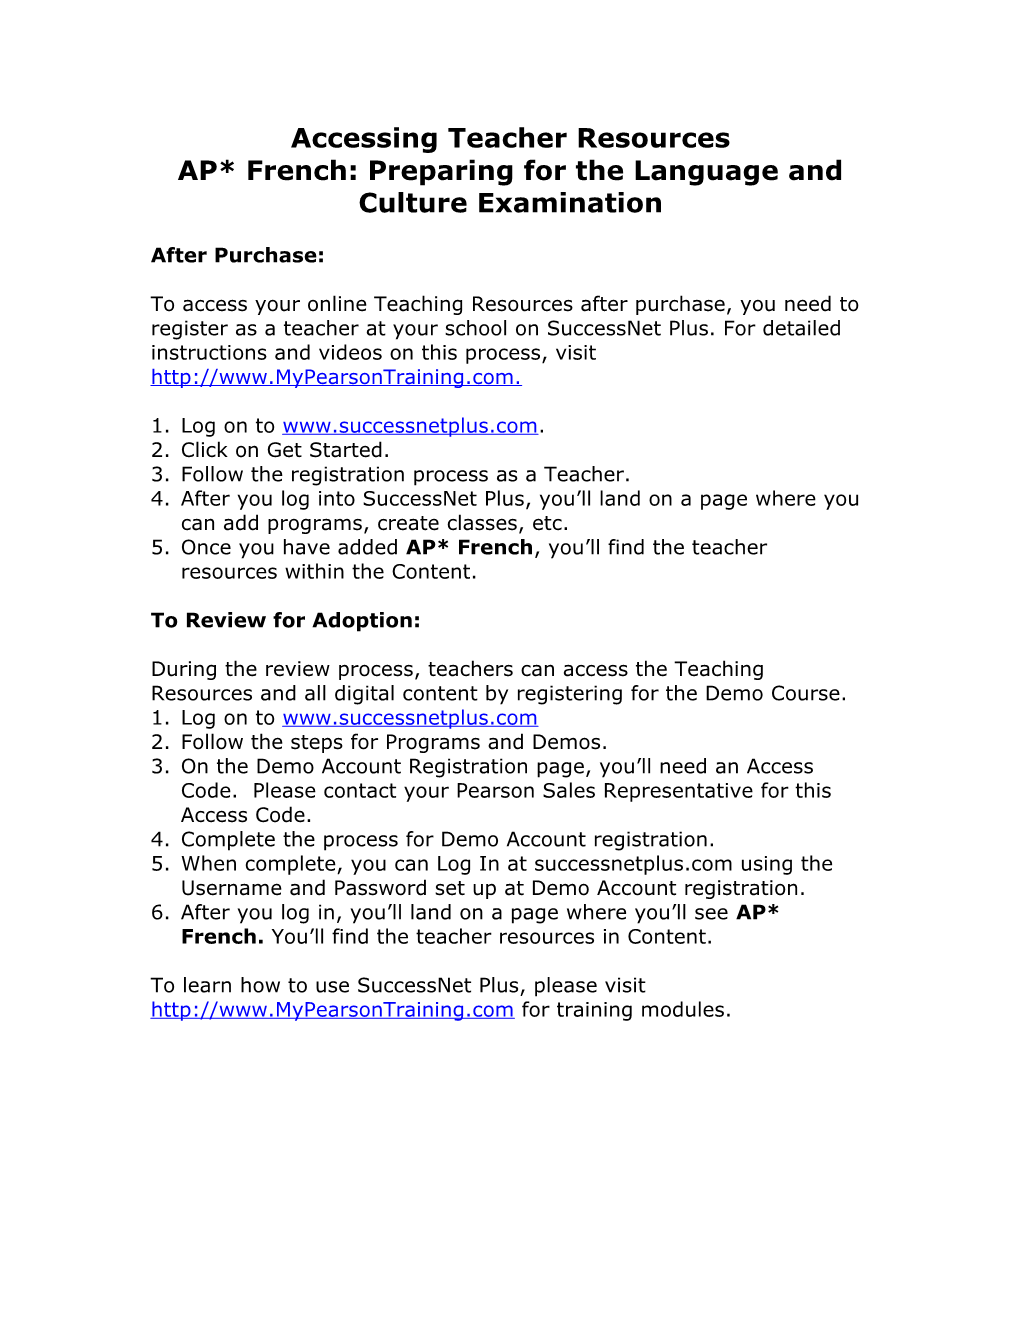 Accessing the Teacher Resources After Purchase: AP French